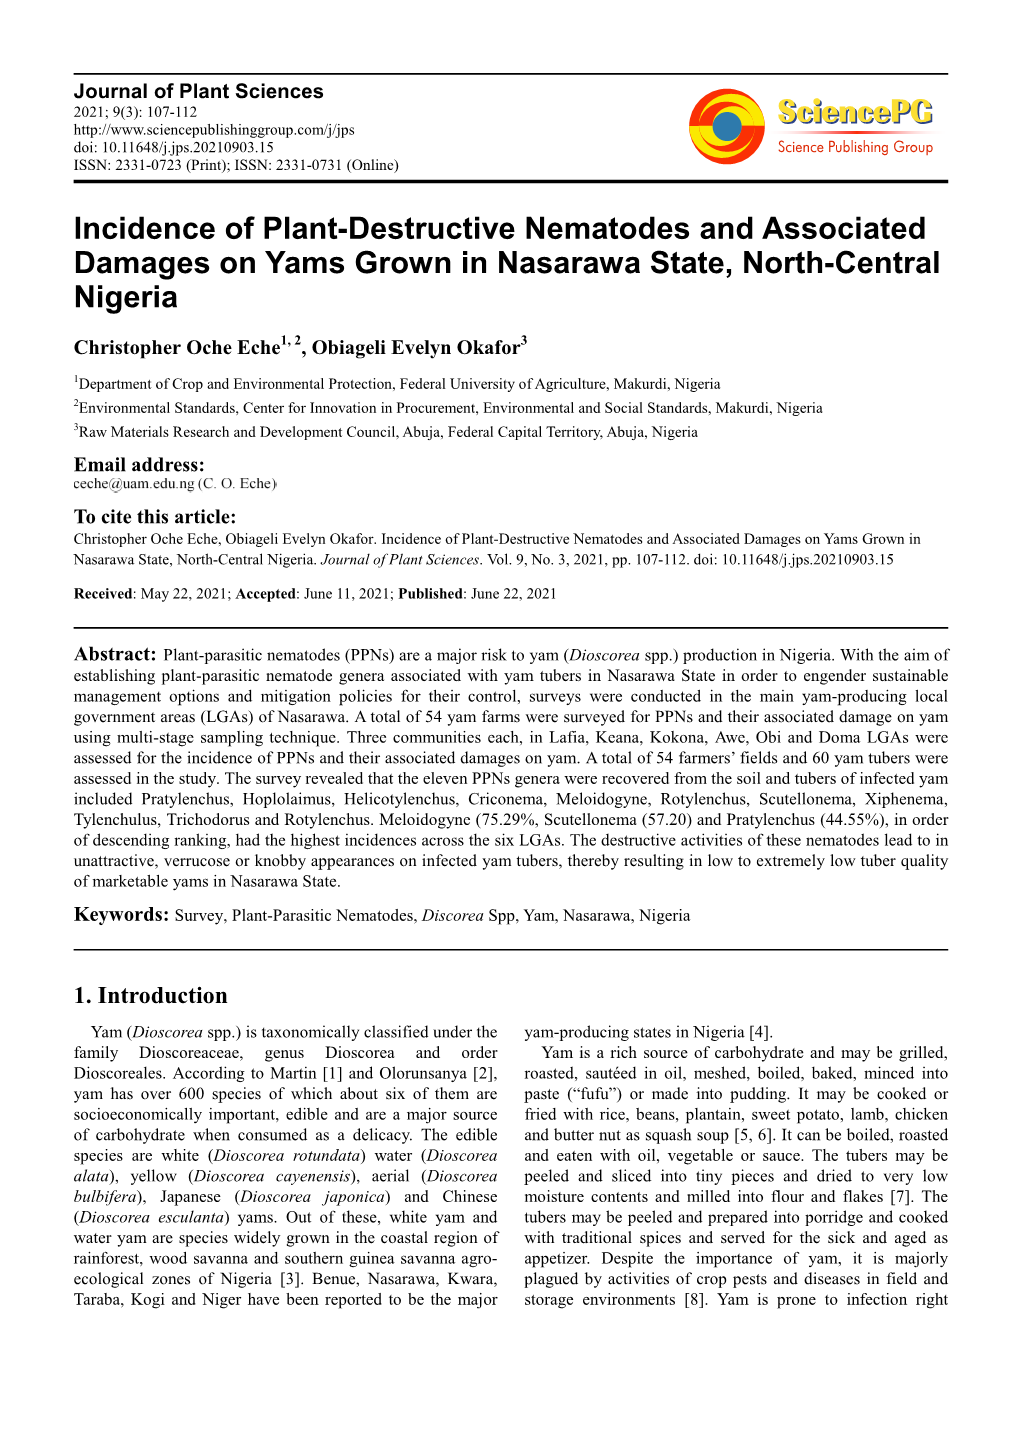 Incidence of Plant-Destructive Nematodes and Associated Damages on Yams Grown in Nasarawa State, North-Central Nigeria